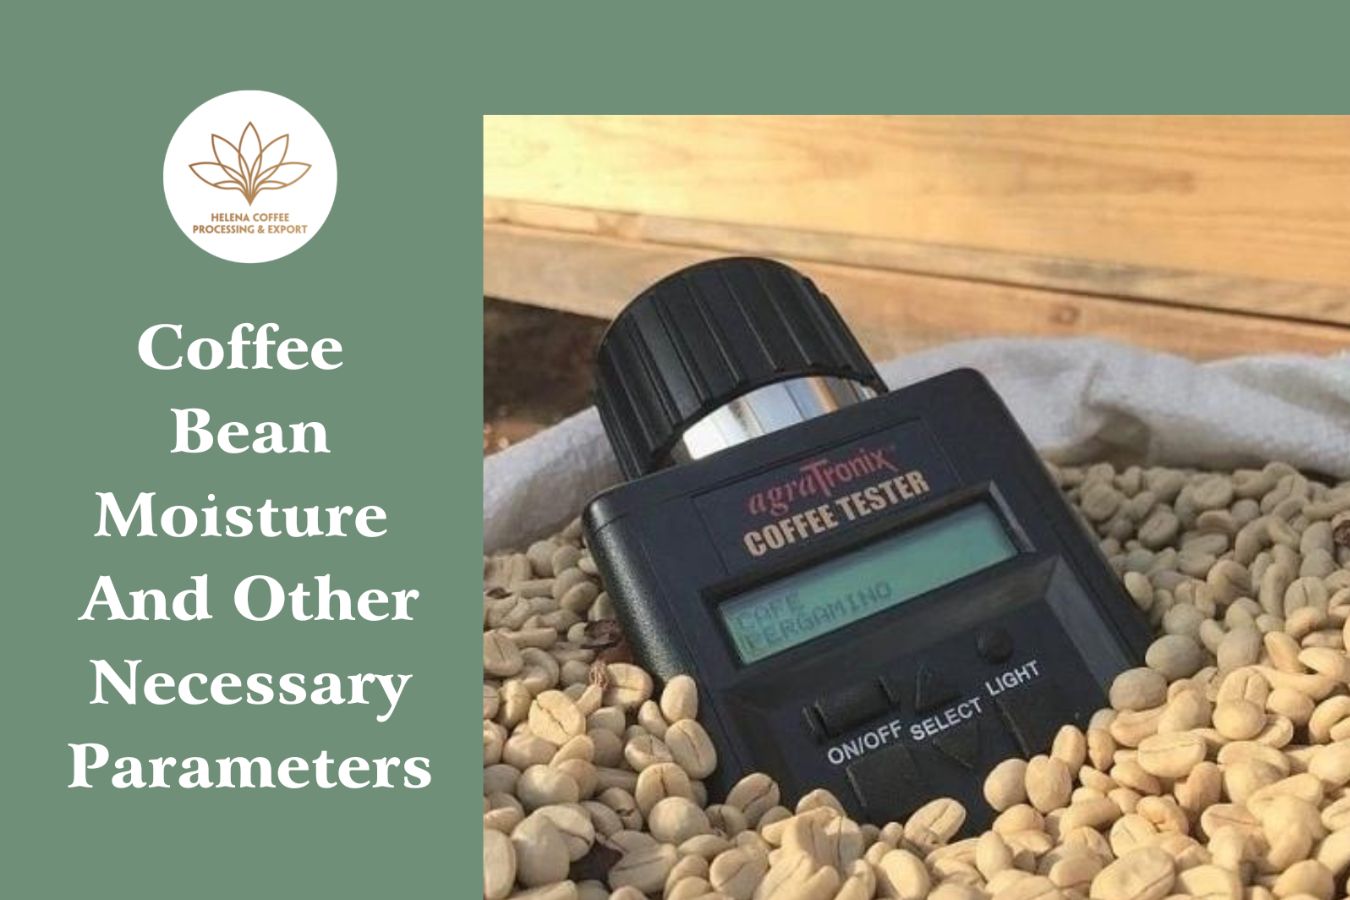 Coffee Bean Moisture And Other Necessary Parameters